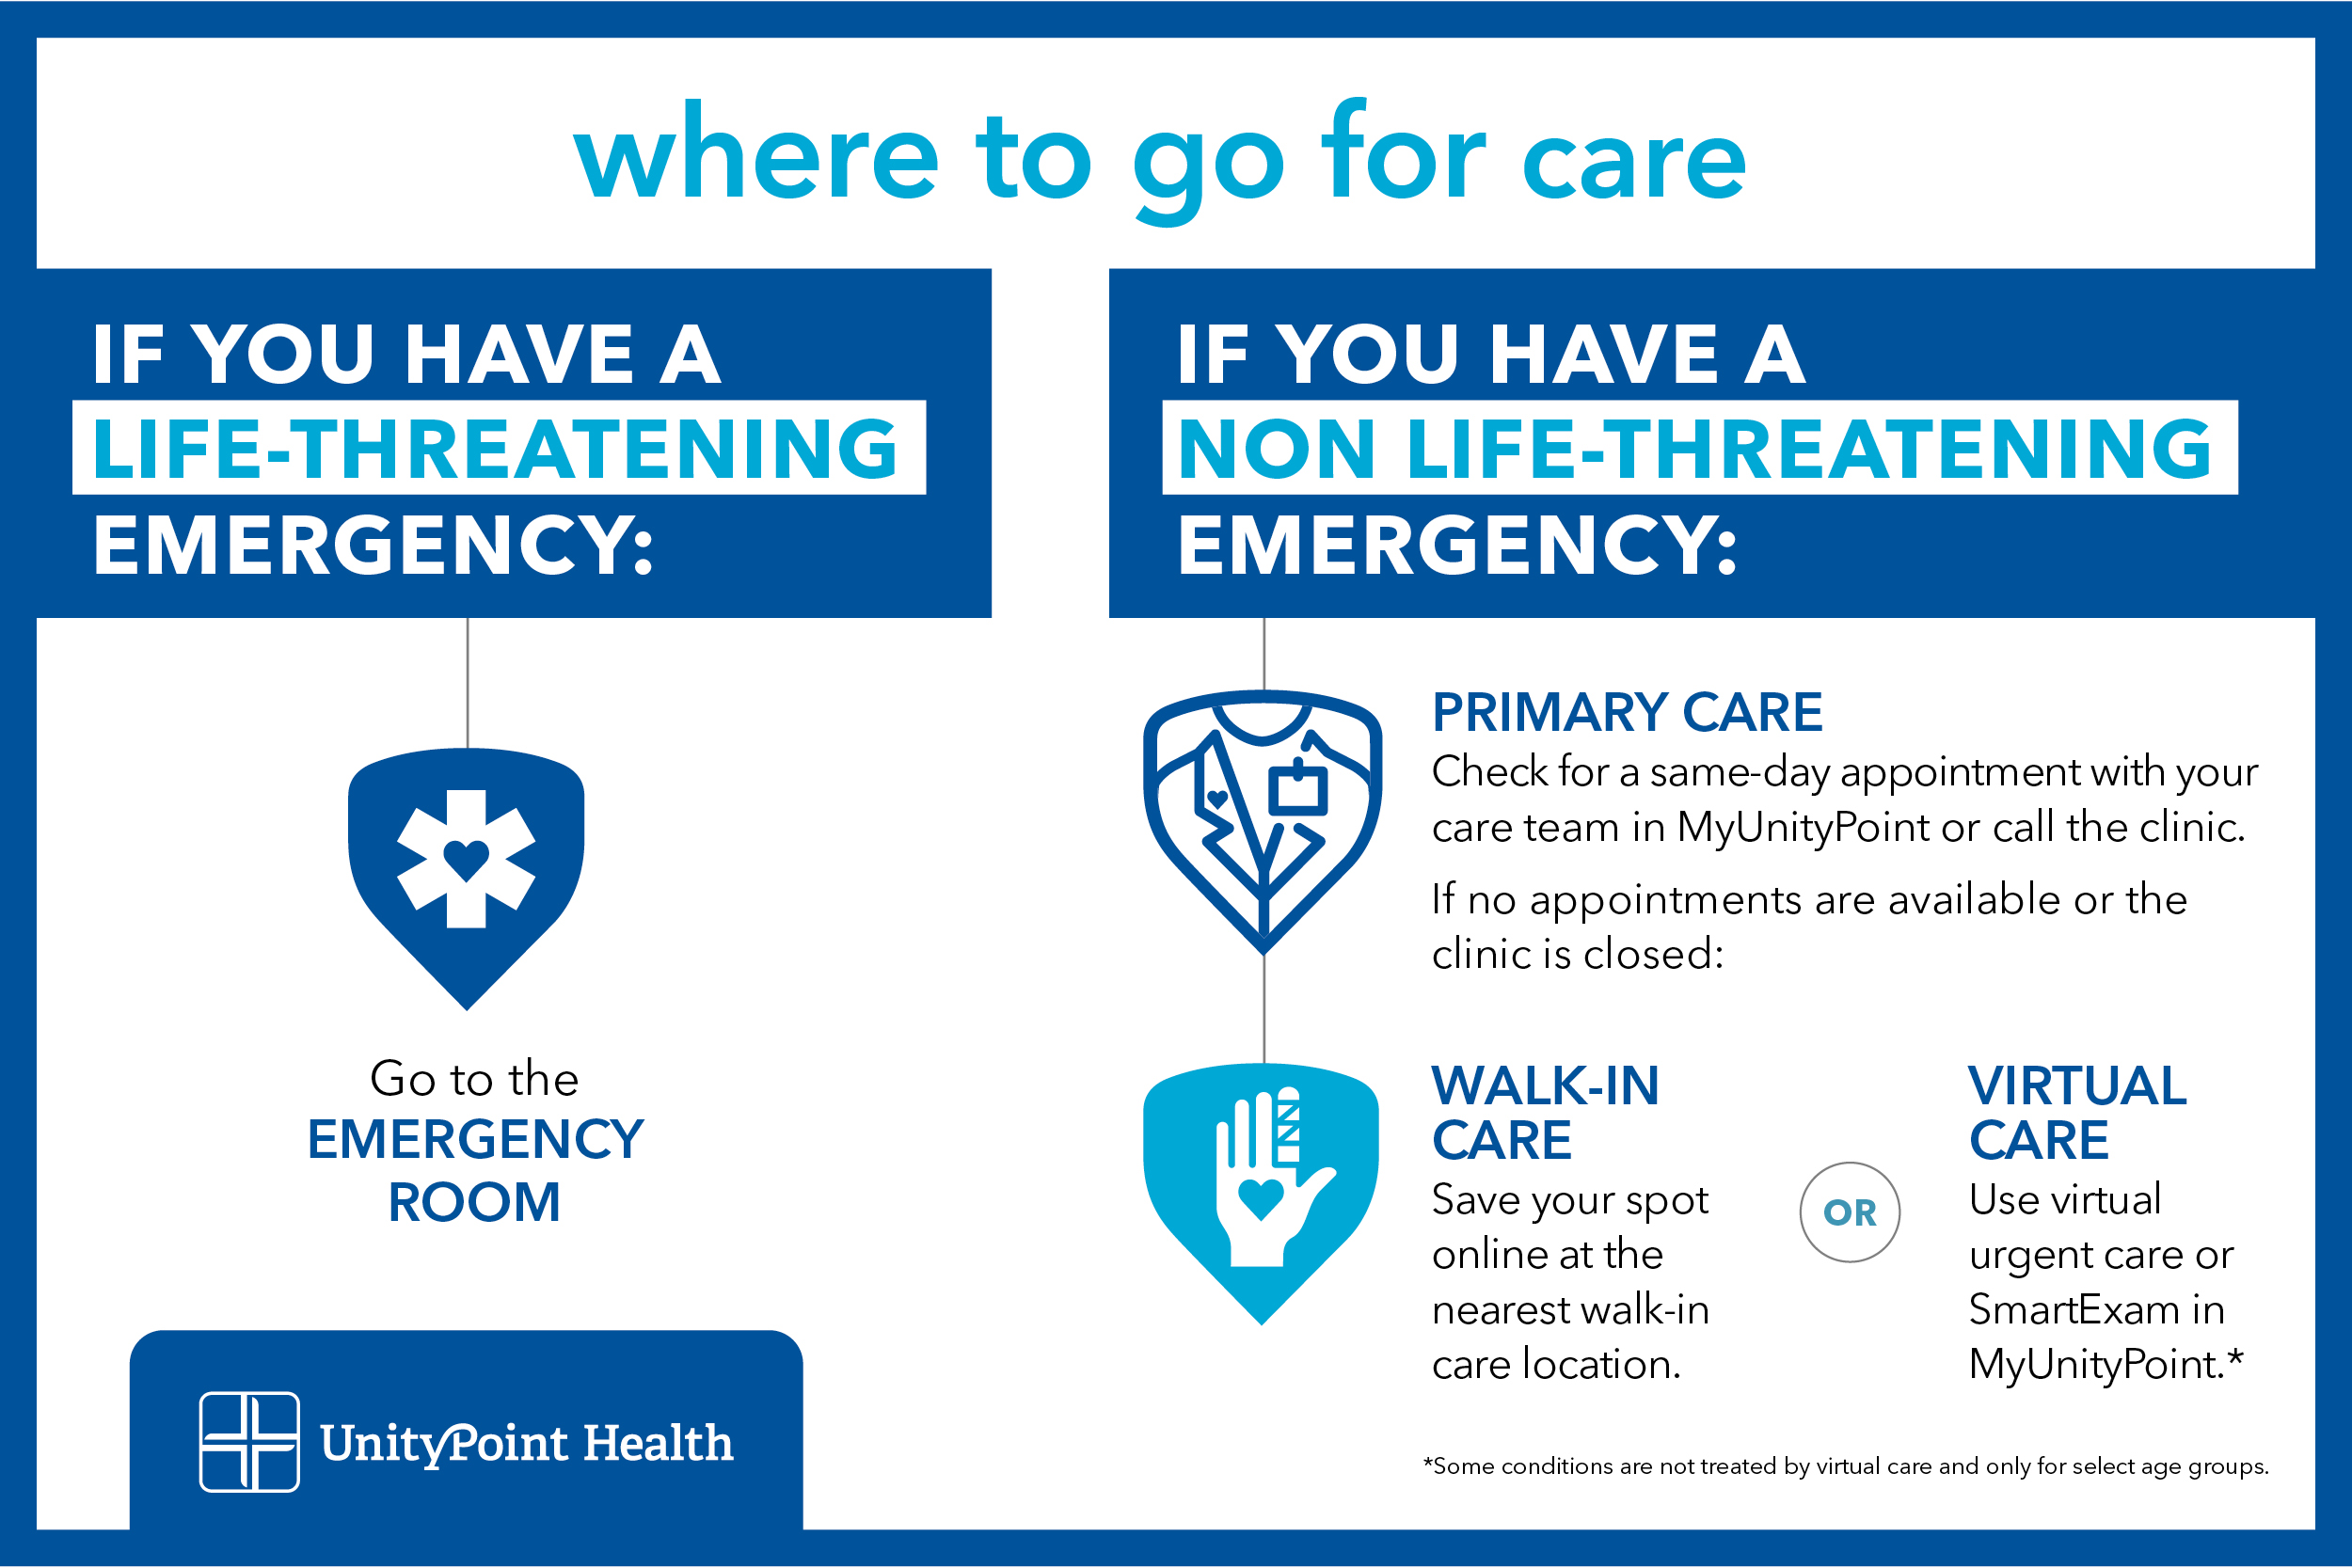 Where to go for care graphic.jpg